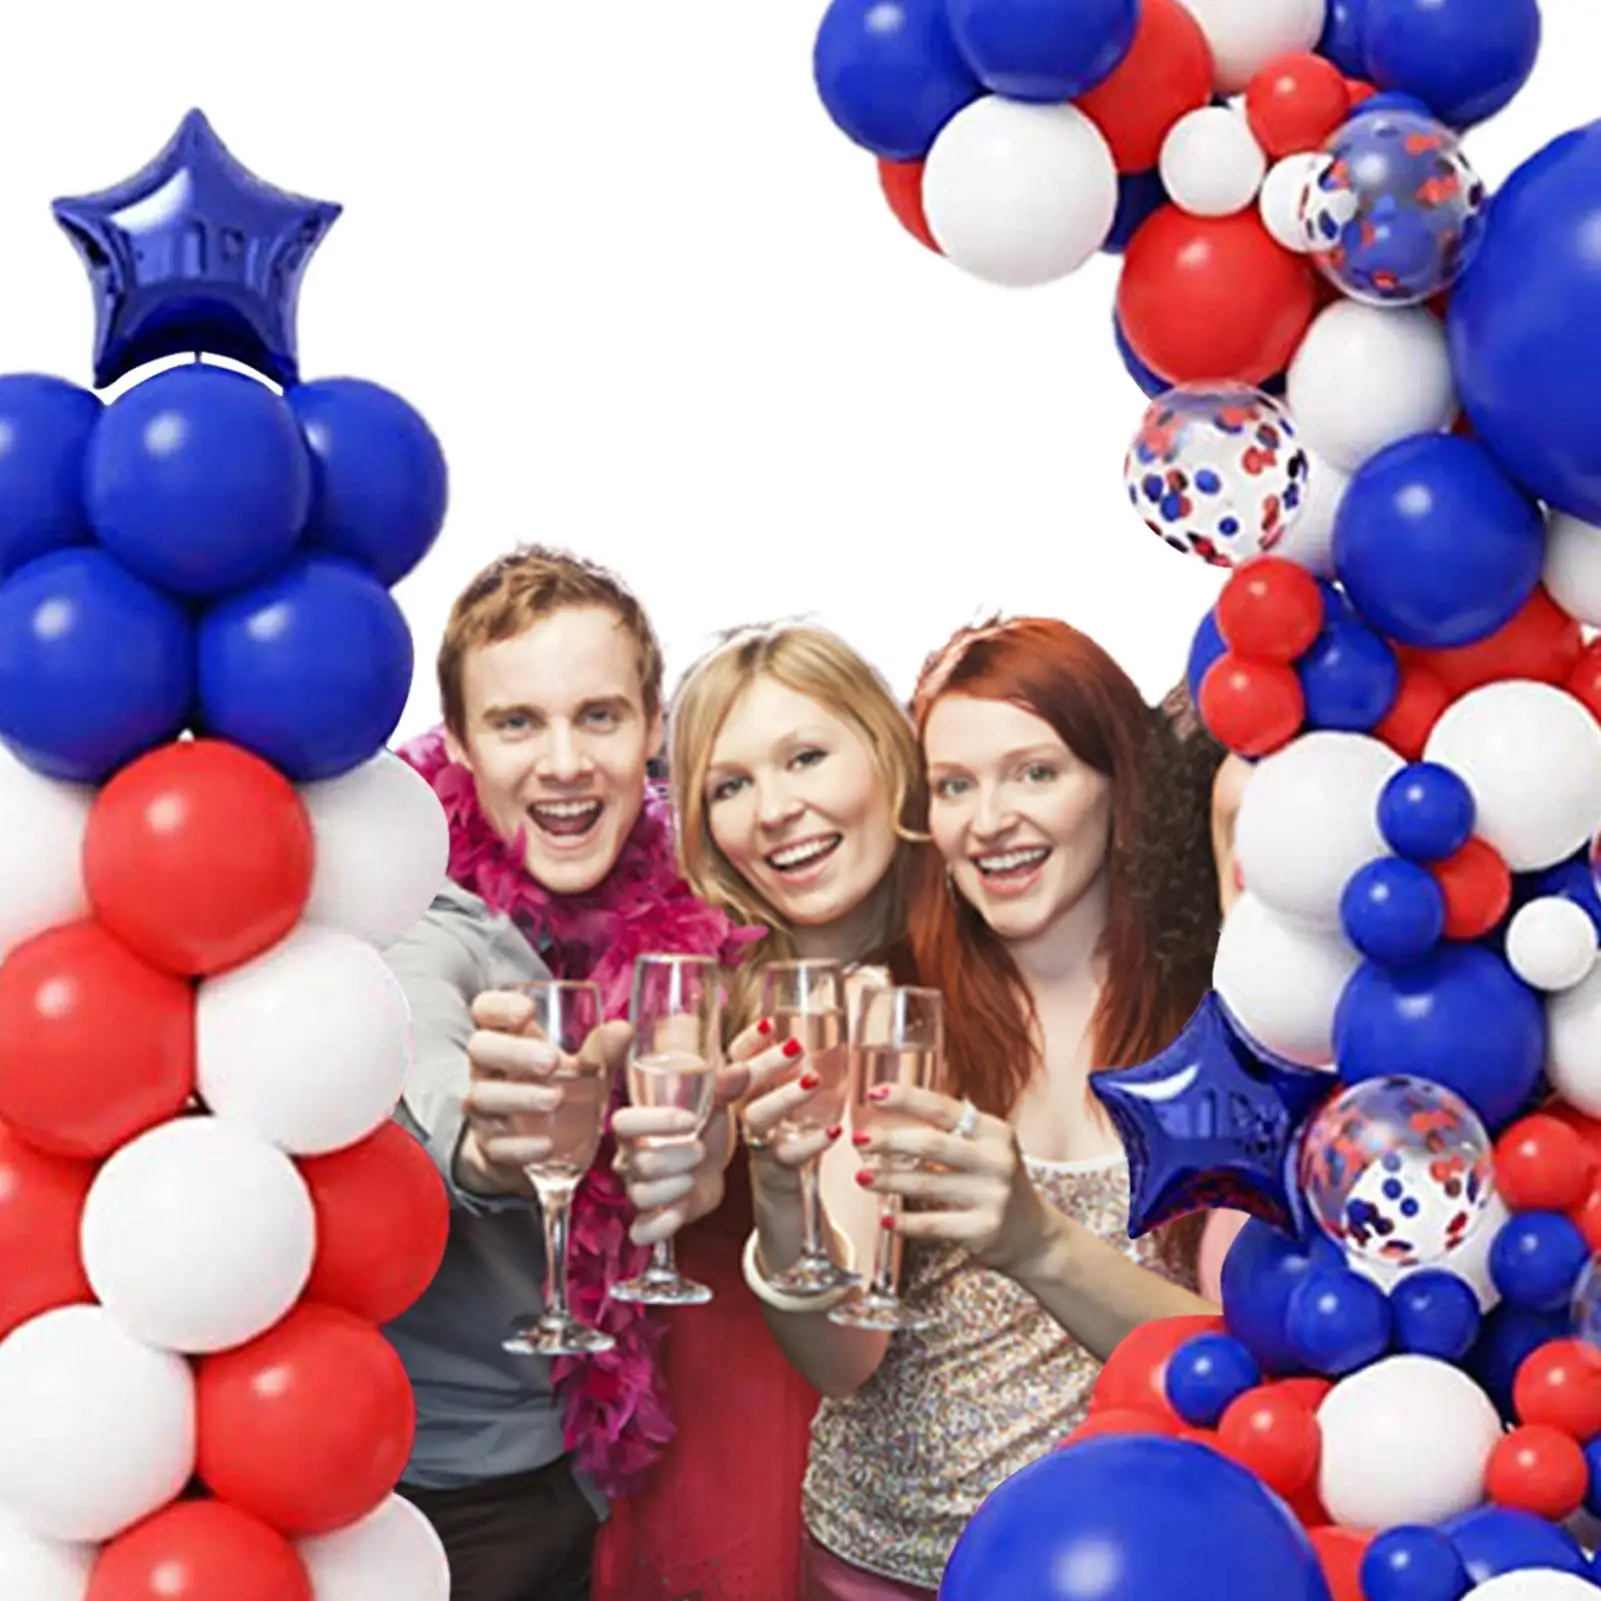 

145pcs United Kingdom Theme Balloon Queen's Jubilee Party Balloon Decorations 2022 Queen's 70th Platinums Jubilee Parties Decors